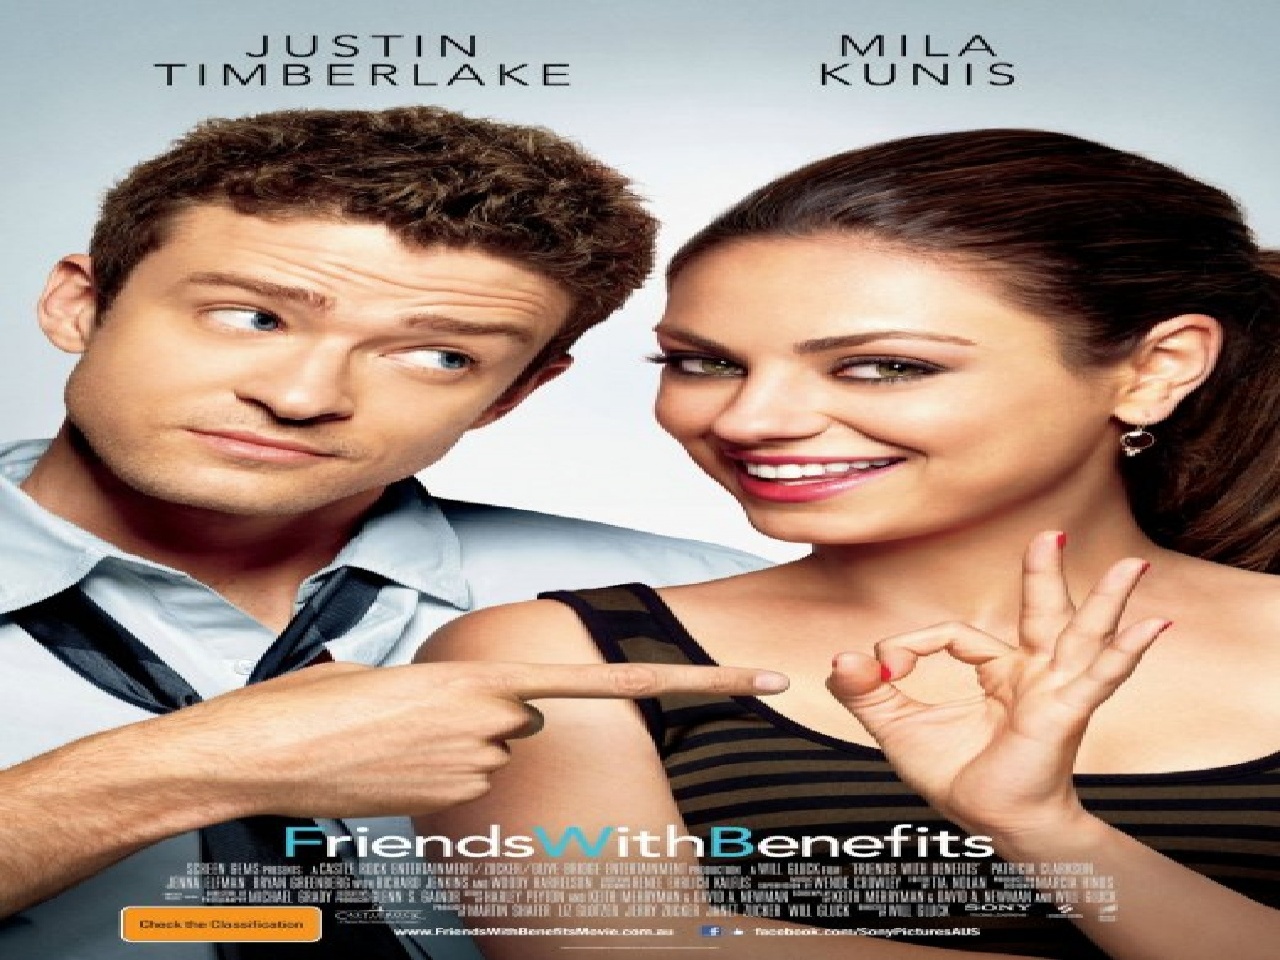 Watch Friends With Benefits Online For Free